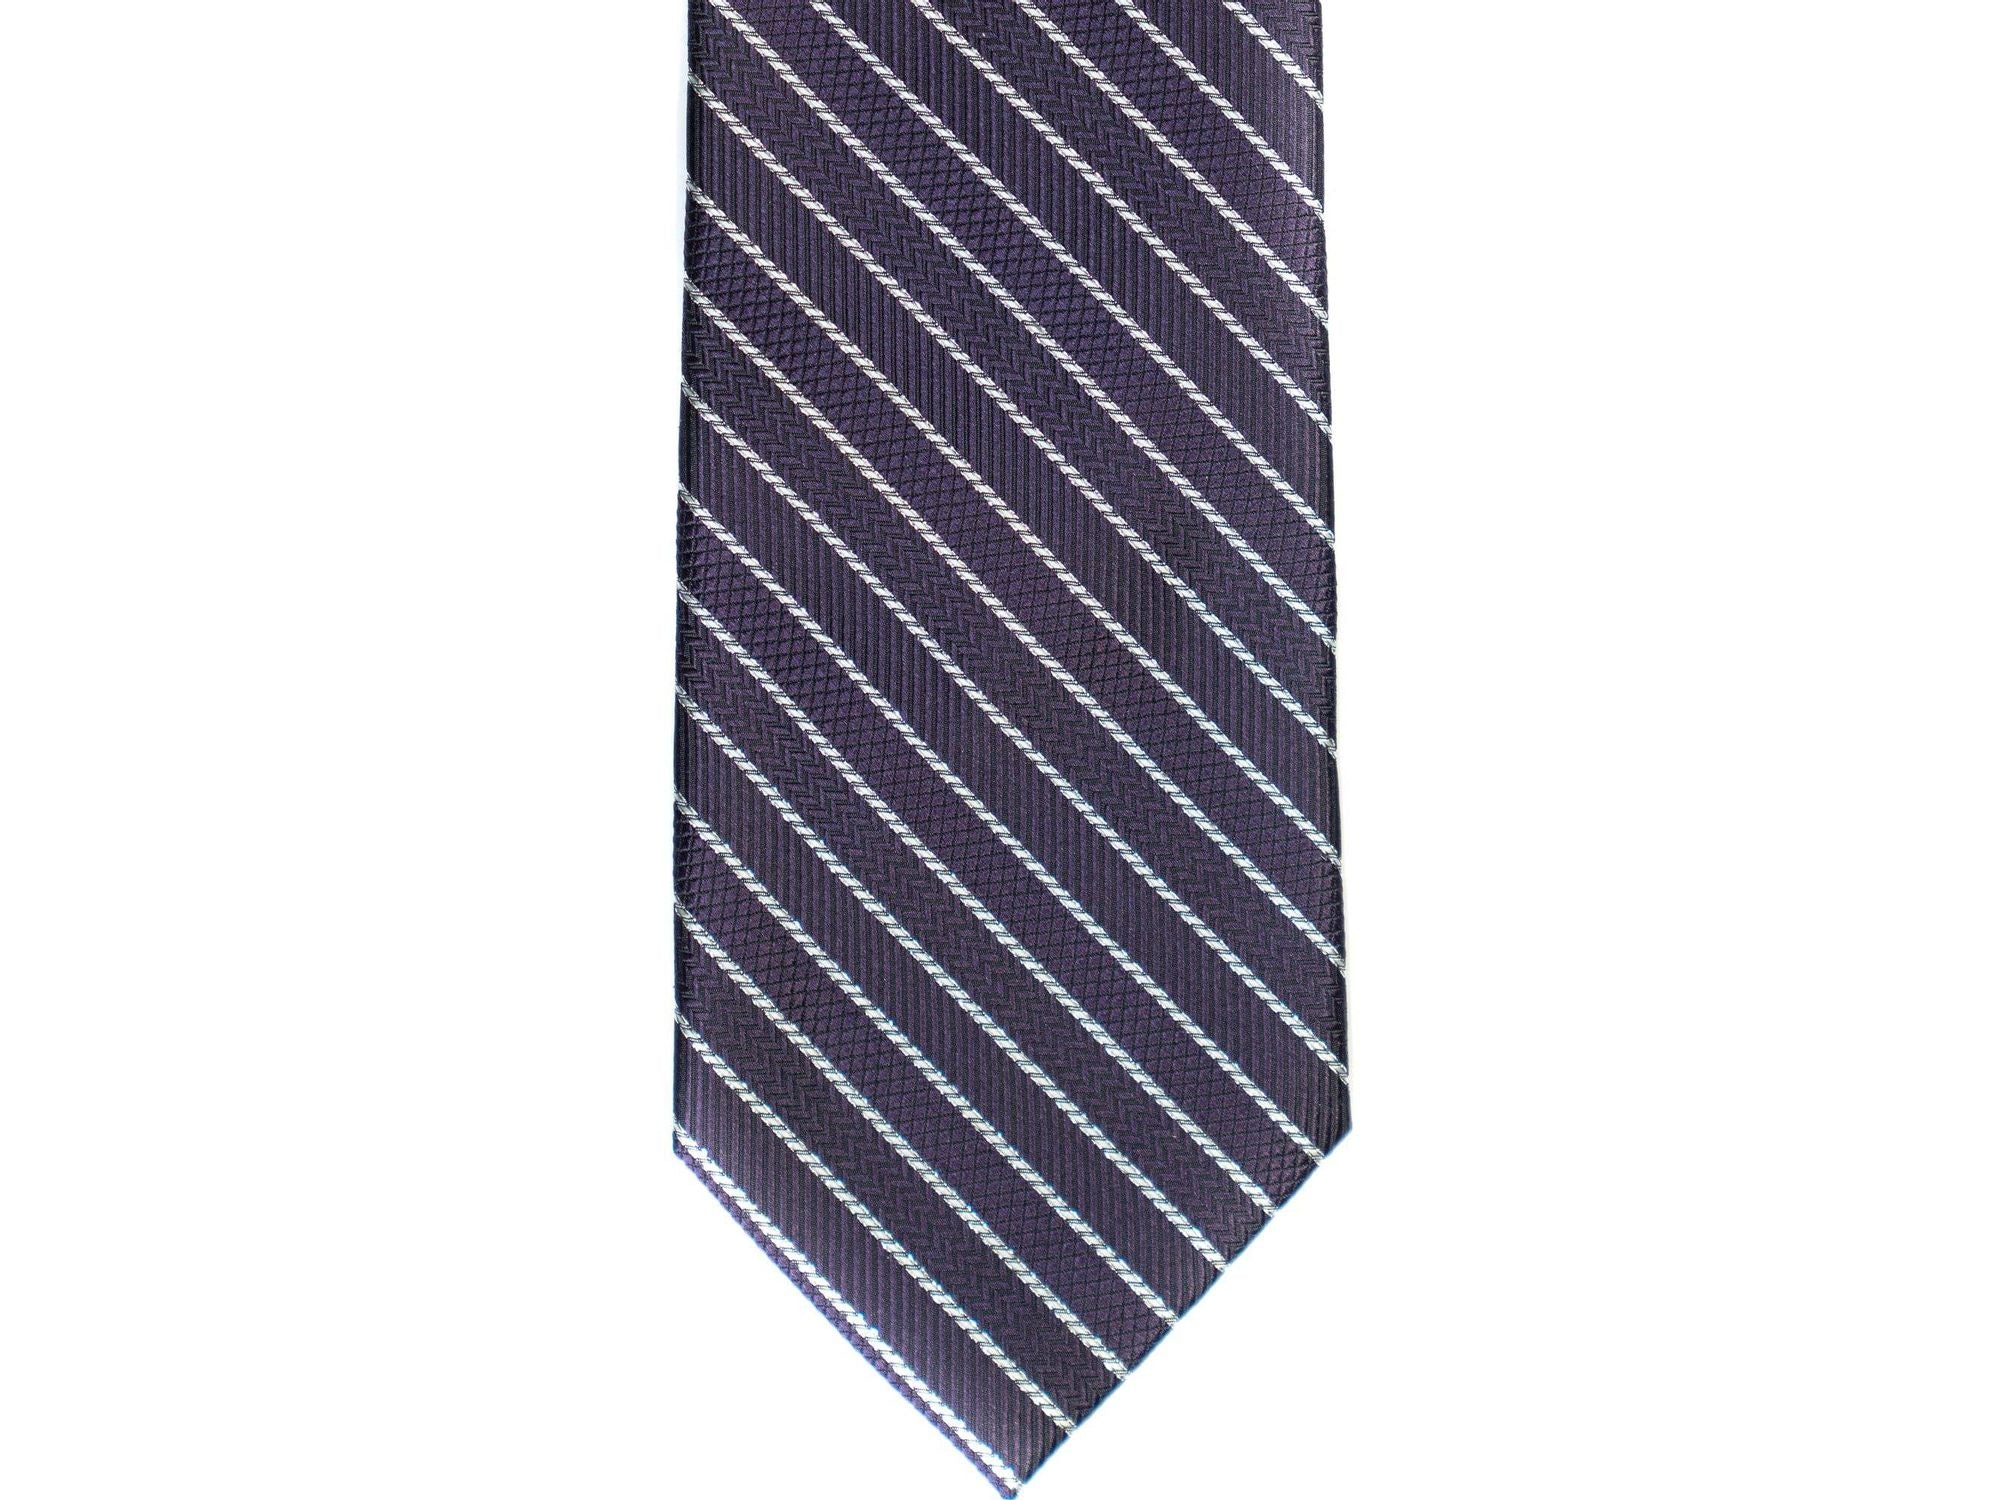 Silk Tie In Purple With Silver Stripes - Rainwater's Men's Clothing and Tuxedo Rental